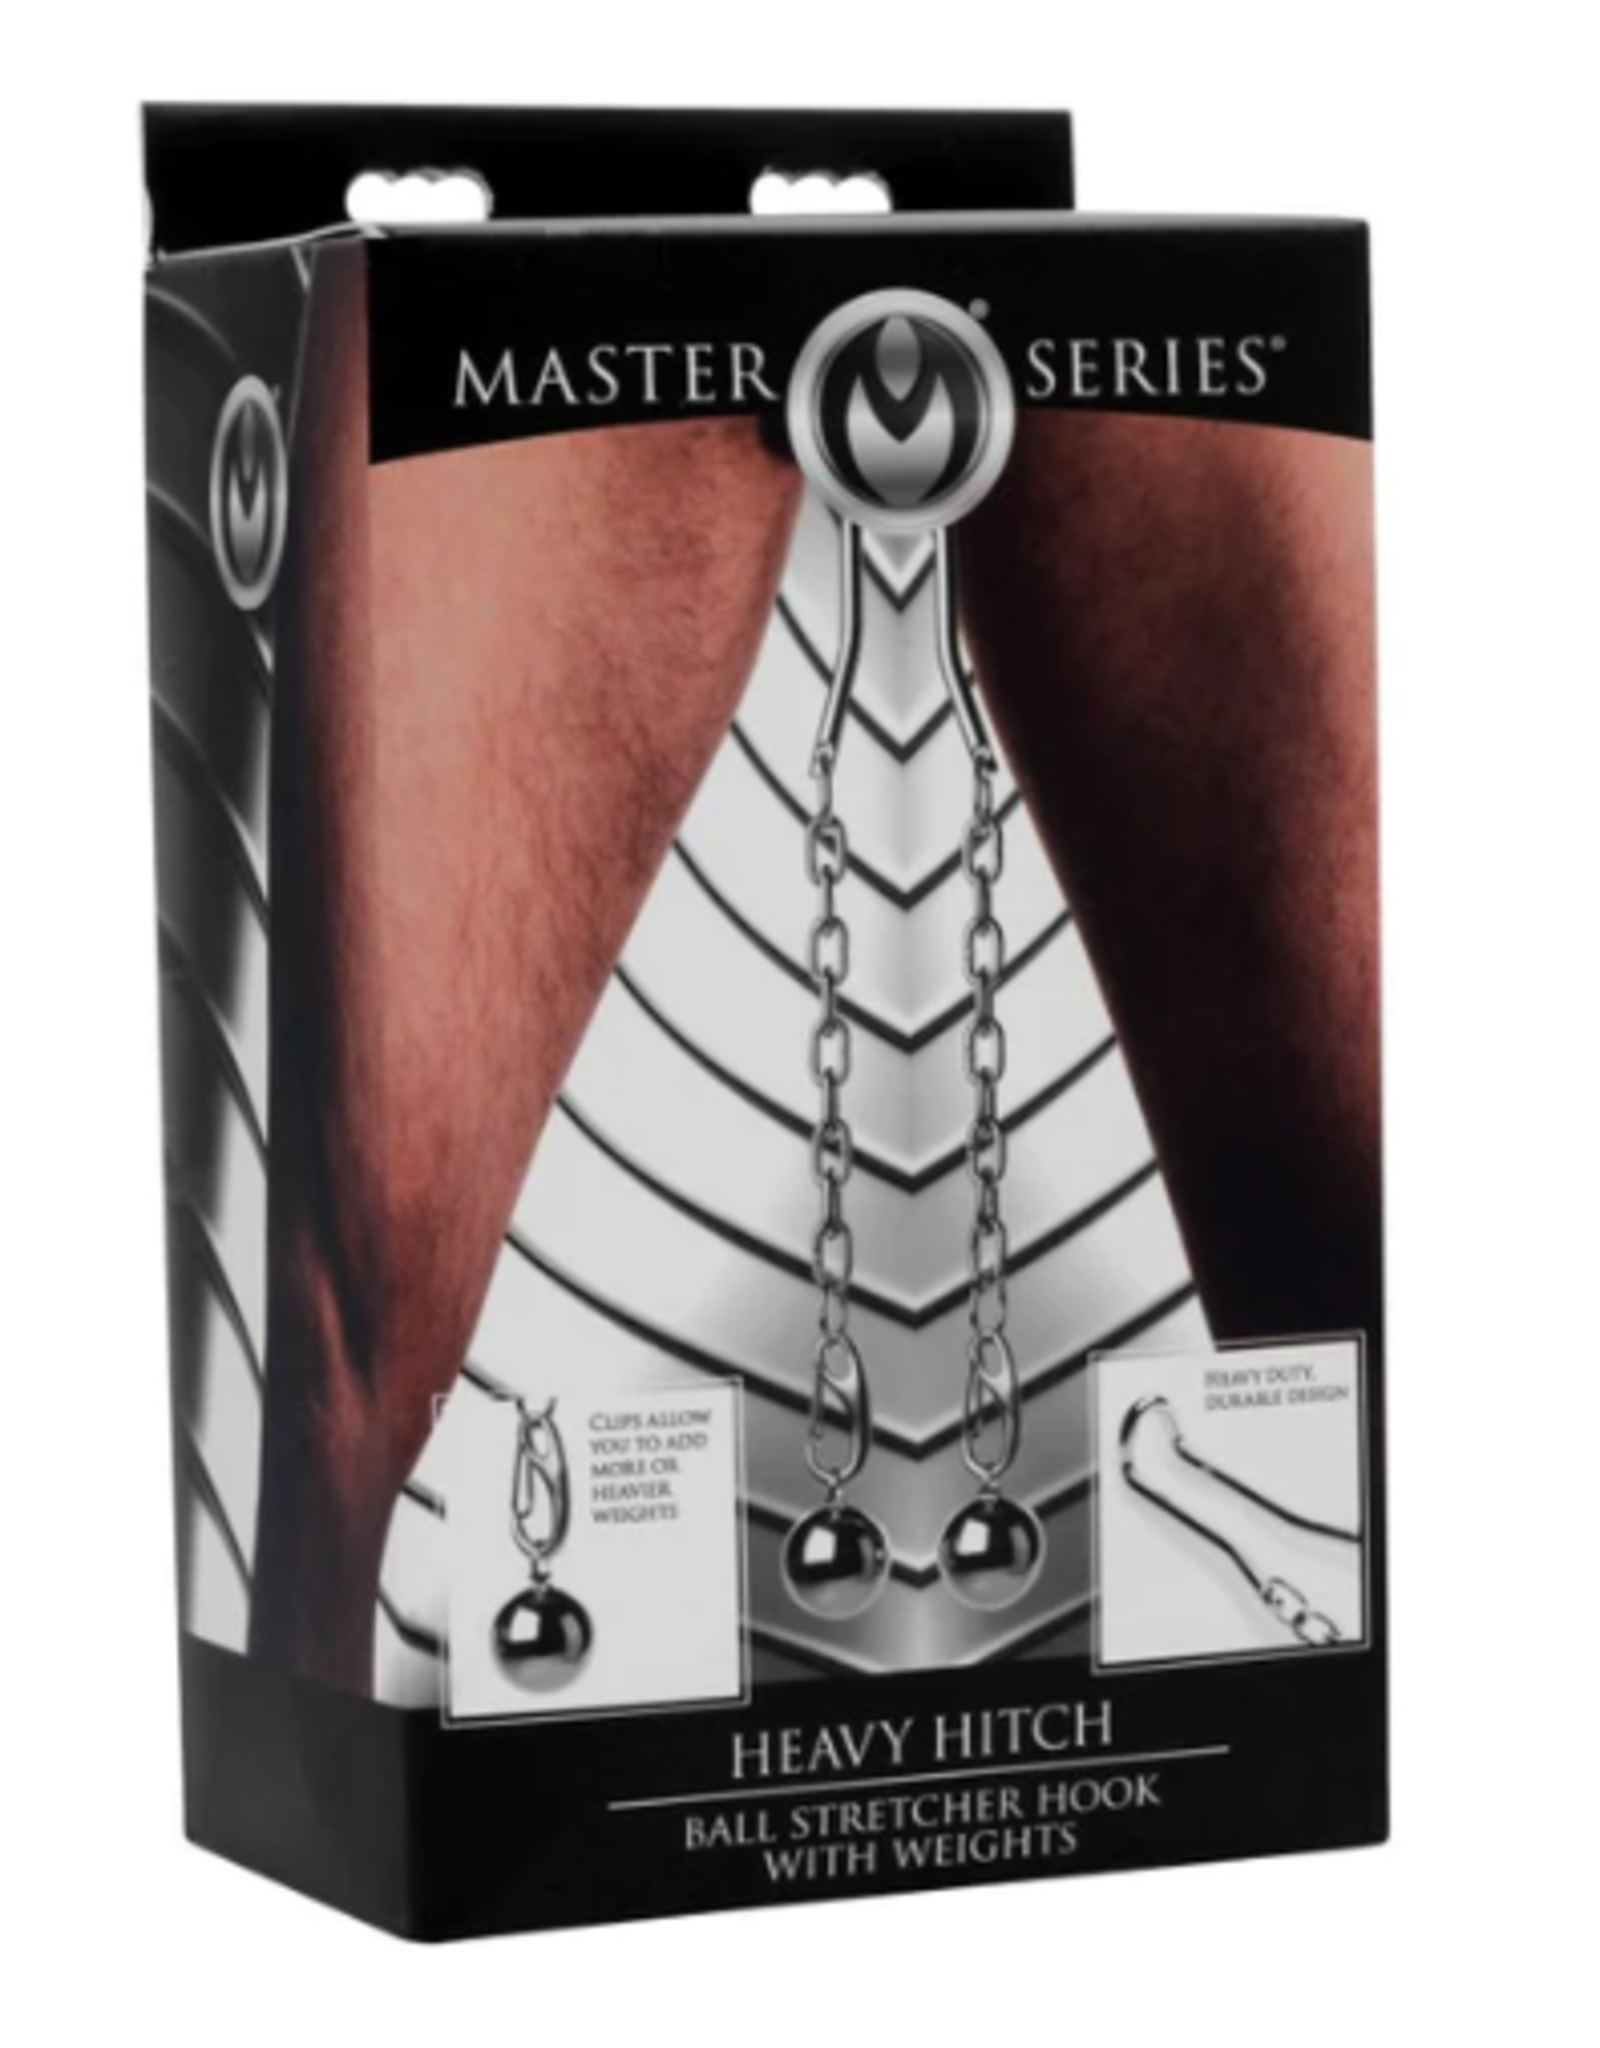 Master Series - Heavy Hitch Ball Stretcher Hook with Weights